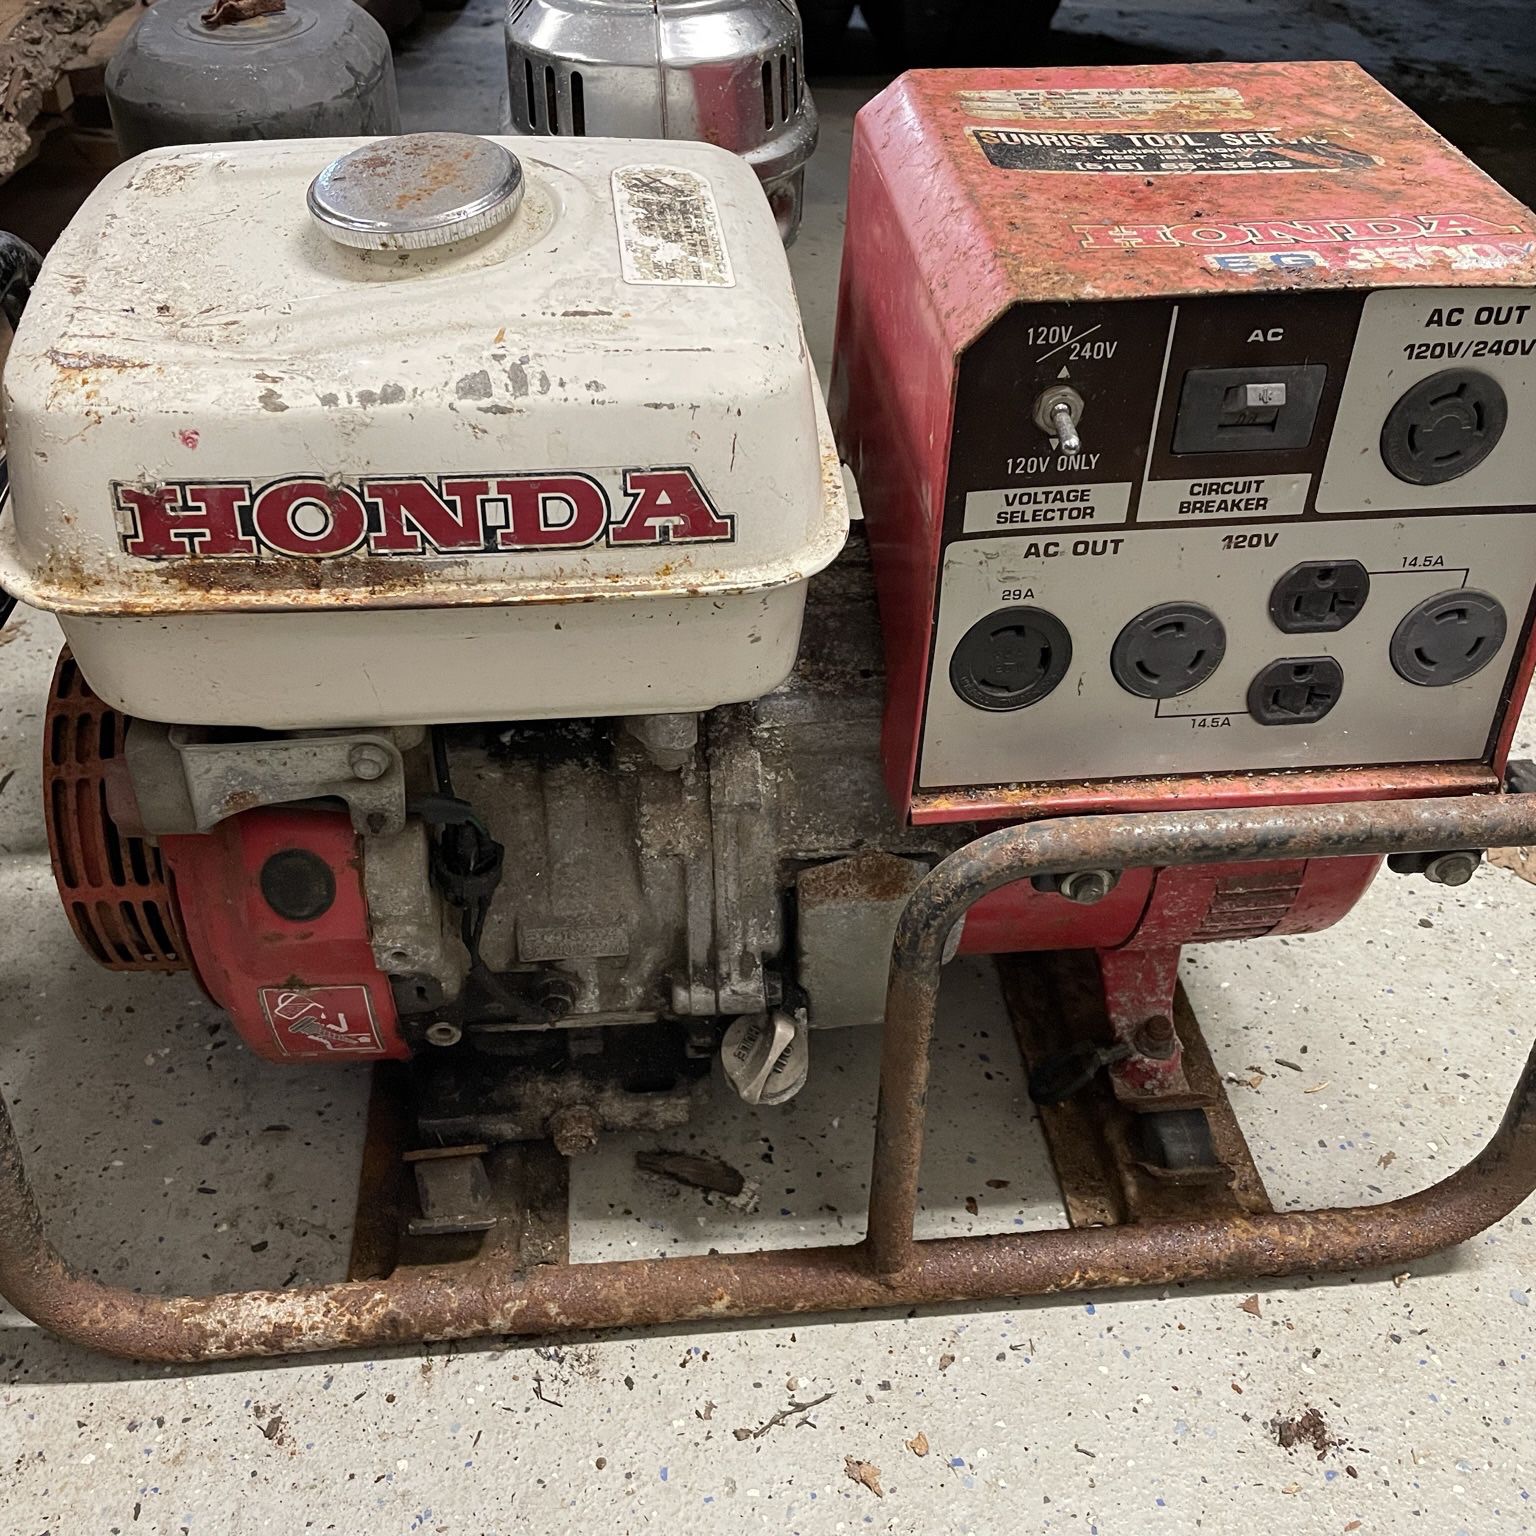 Landmand glide Omkreds Honda Generator 3500 for Sale in Smithtown, NY - OfferUp